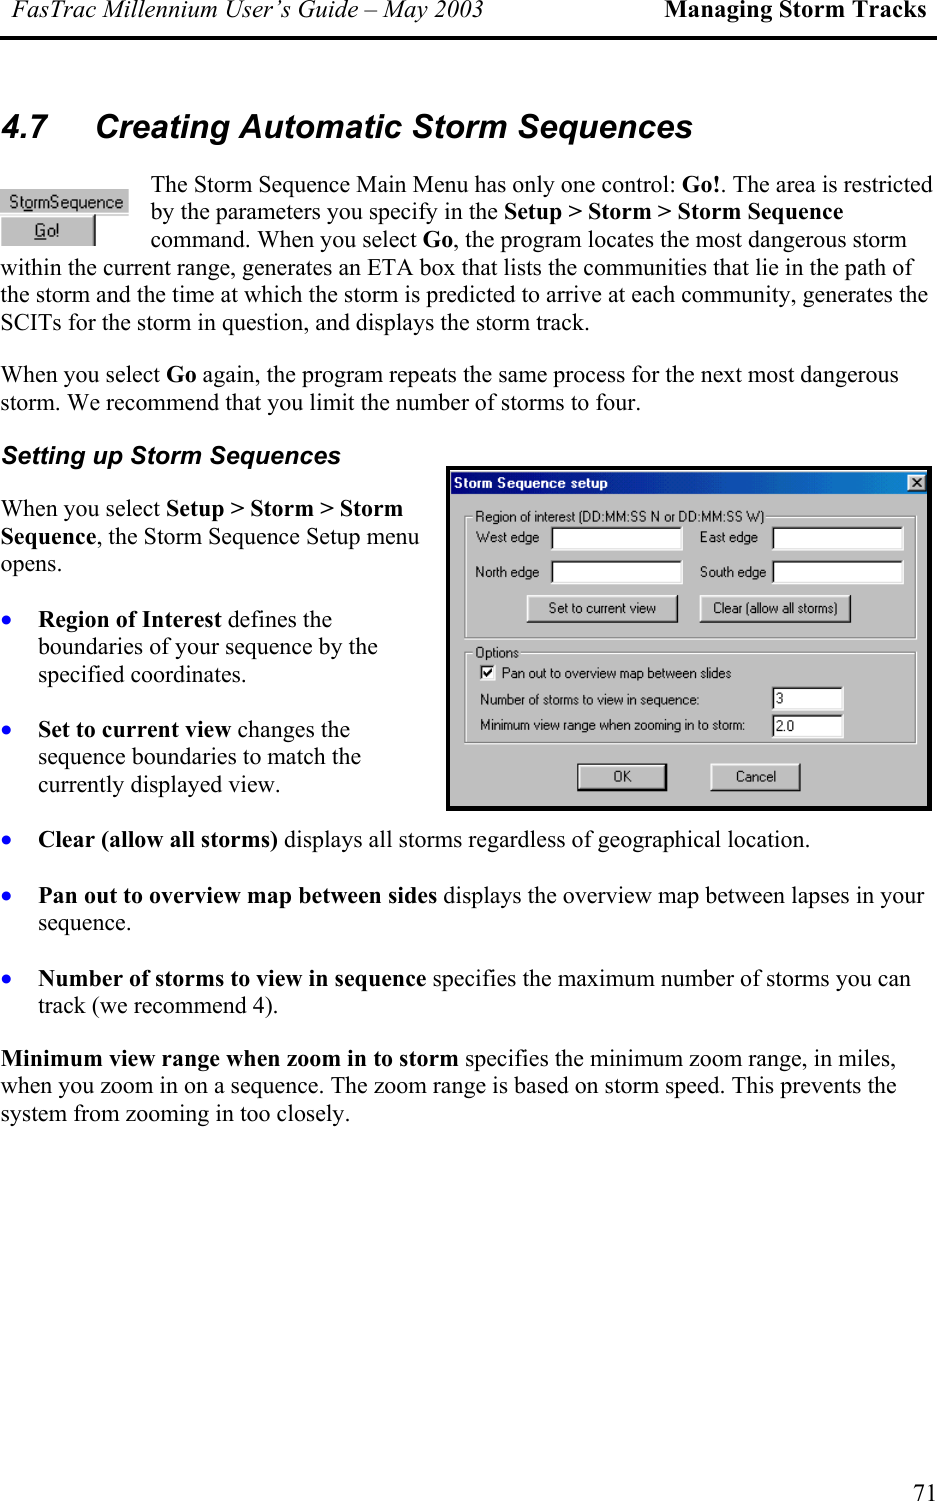 FasTrac Millennium User’s Guide – May 2003 Managing Storm Tracks 4.7  Creating Automatic Storm Sequences The Storm Sequence Main Menu has only one control: Go!. The area is restricted by the parameters you specify in the Setup &gt; Storm &gt; Storm Sequence command. When you select Go, the program locates the most dangerous storm within the current range, generates an ETA box that lists the communities that lie in the path of the storm and the time at which the storm is predicted to arrive at each community, generates the SCITs for the storm in question, and displays the storm track. When you select Go again, the program repeats the same process for the next most dangerous storm. We recommend that you limit the number of storms to four. Setting up Storm Sequences When you select Setup &gt; Storm &gt; Storm Sequence, the Storm Sequence Setup menu opens. • • • • • Region of Interest defines the boundaries of your sequence by the specified coordinates. Set to current view changes the sequence boundaries to match the currently displayed view. Clear (allow all storms) displays all storms regardless of geographical location. Pan out to overview map between sides displays the overview map between lapses in your sequence. Number of storms to view in sequence specifies the maximum number of storms you can track (we recommend 4). Minimum view range when zoom in to storm specifies the minimum zoom range, in miles, when you zoom in on a sequence. The zoom range is based on storm speed. This prevents the system from zooming in too closely.   71 